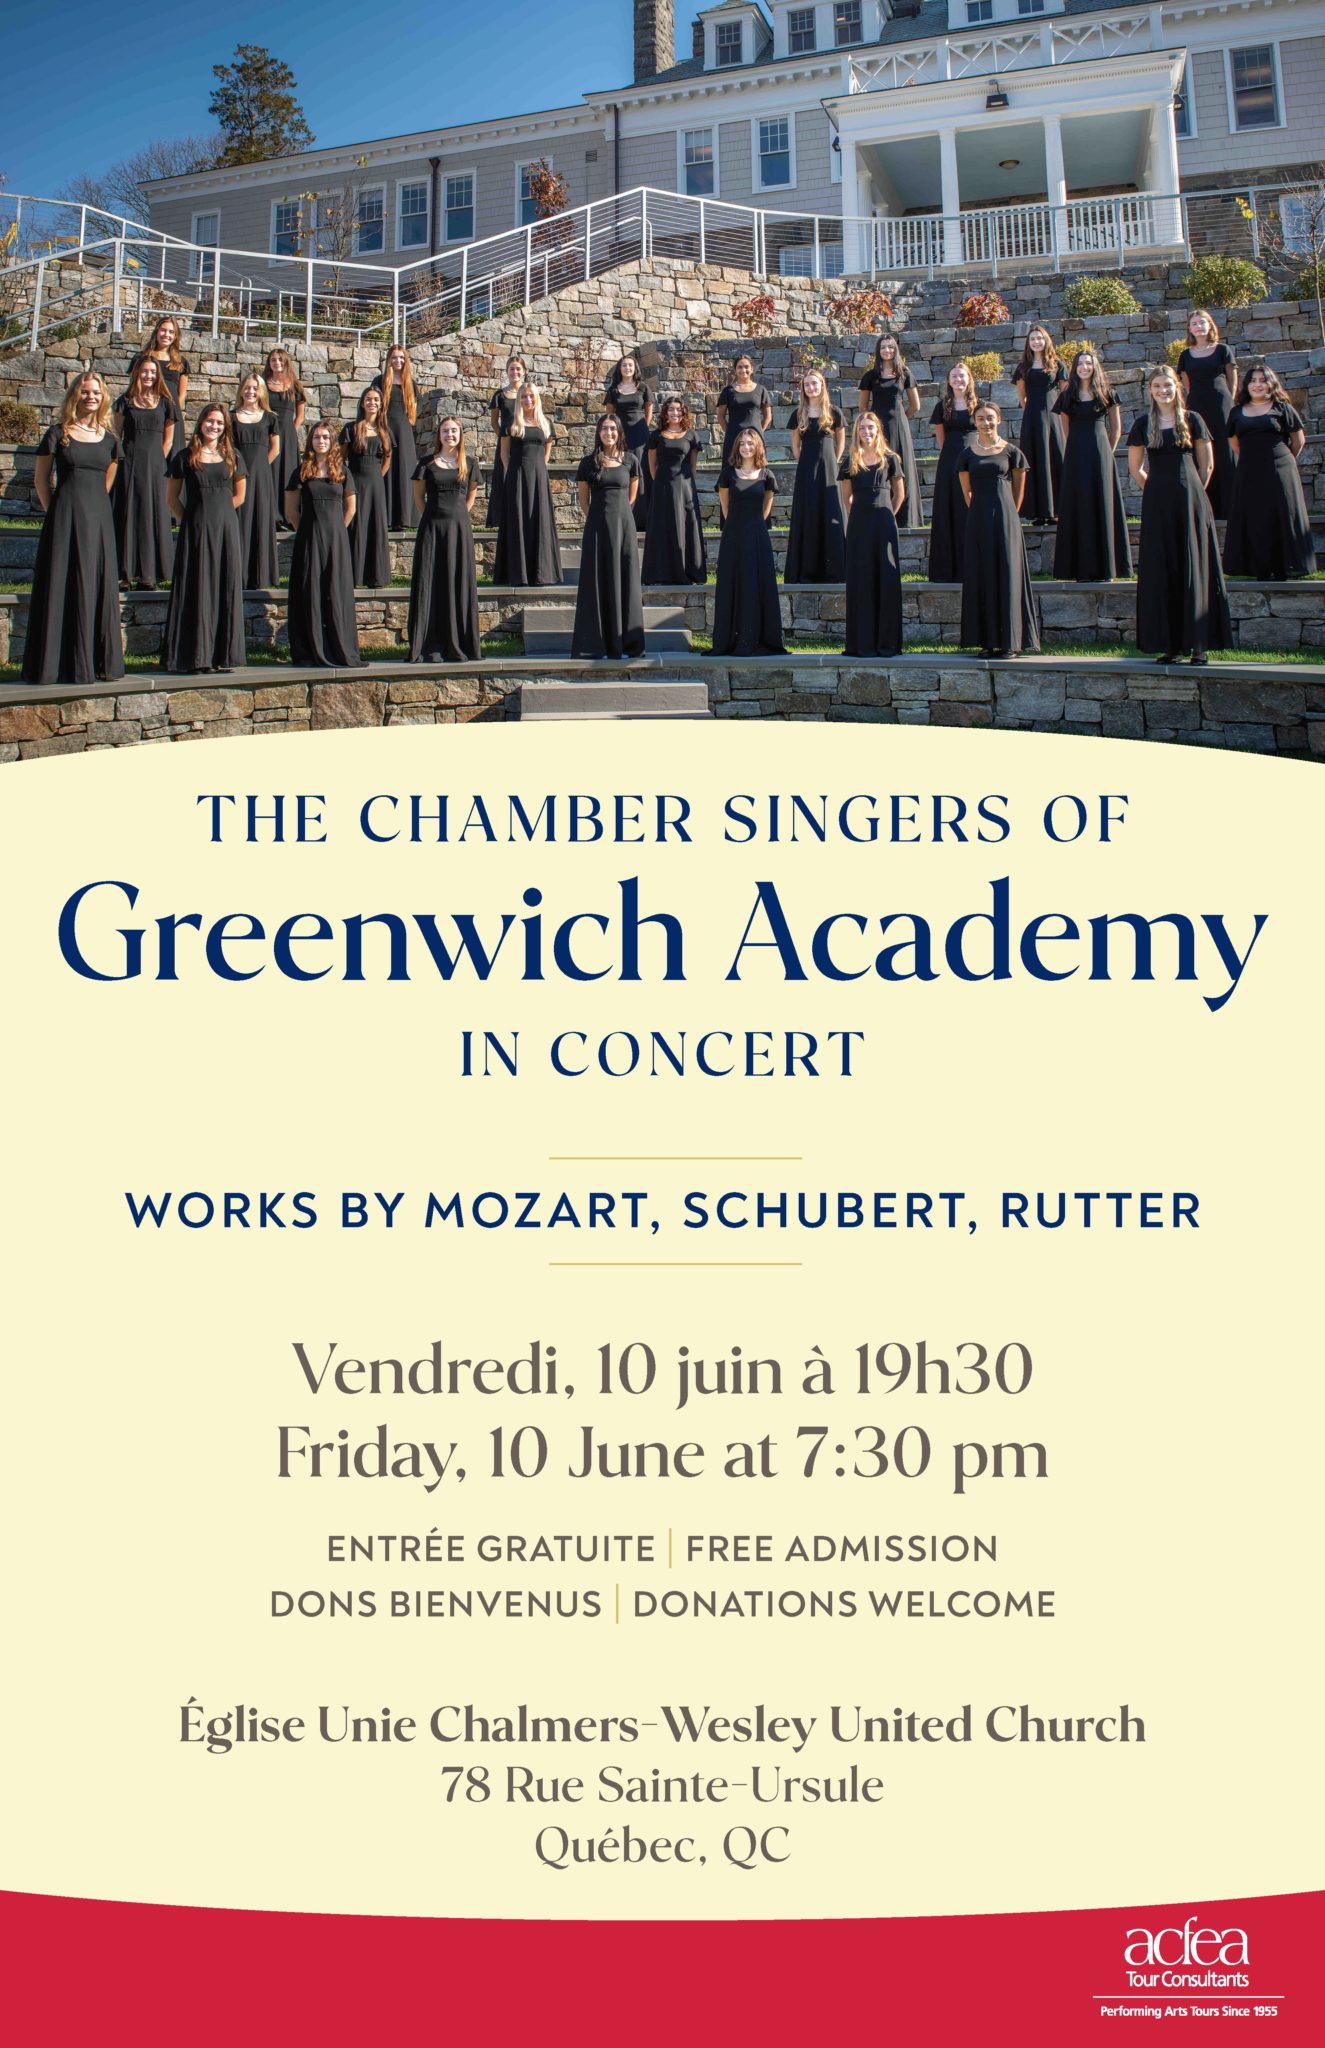 Concert - Chamber Singers of Greenwich Academy @ Chalmers-Wesley United Church